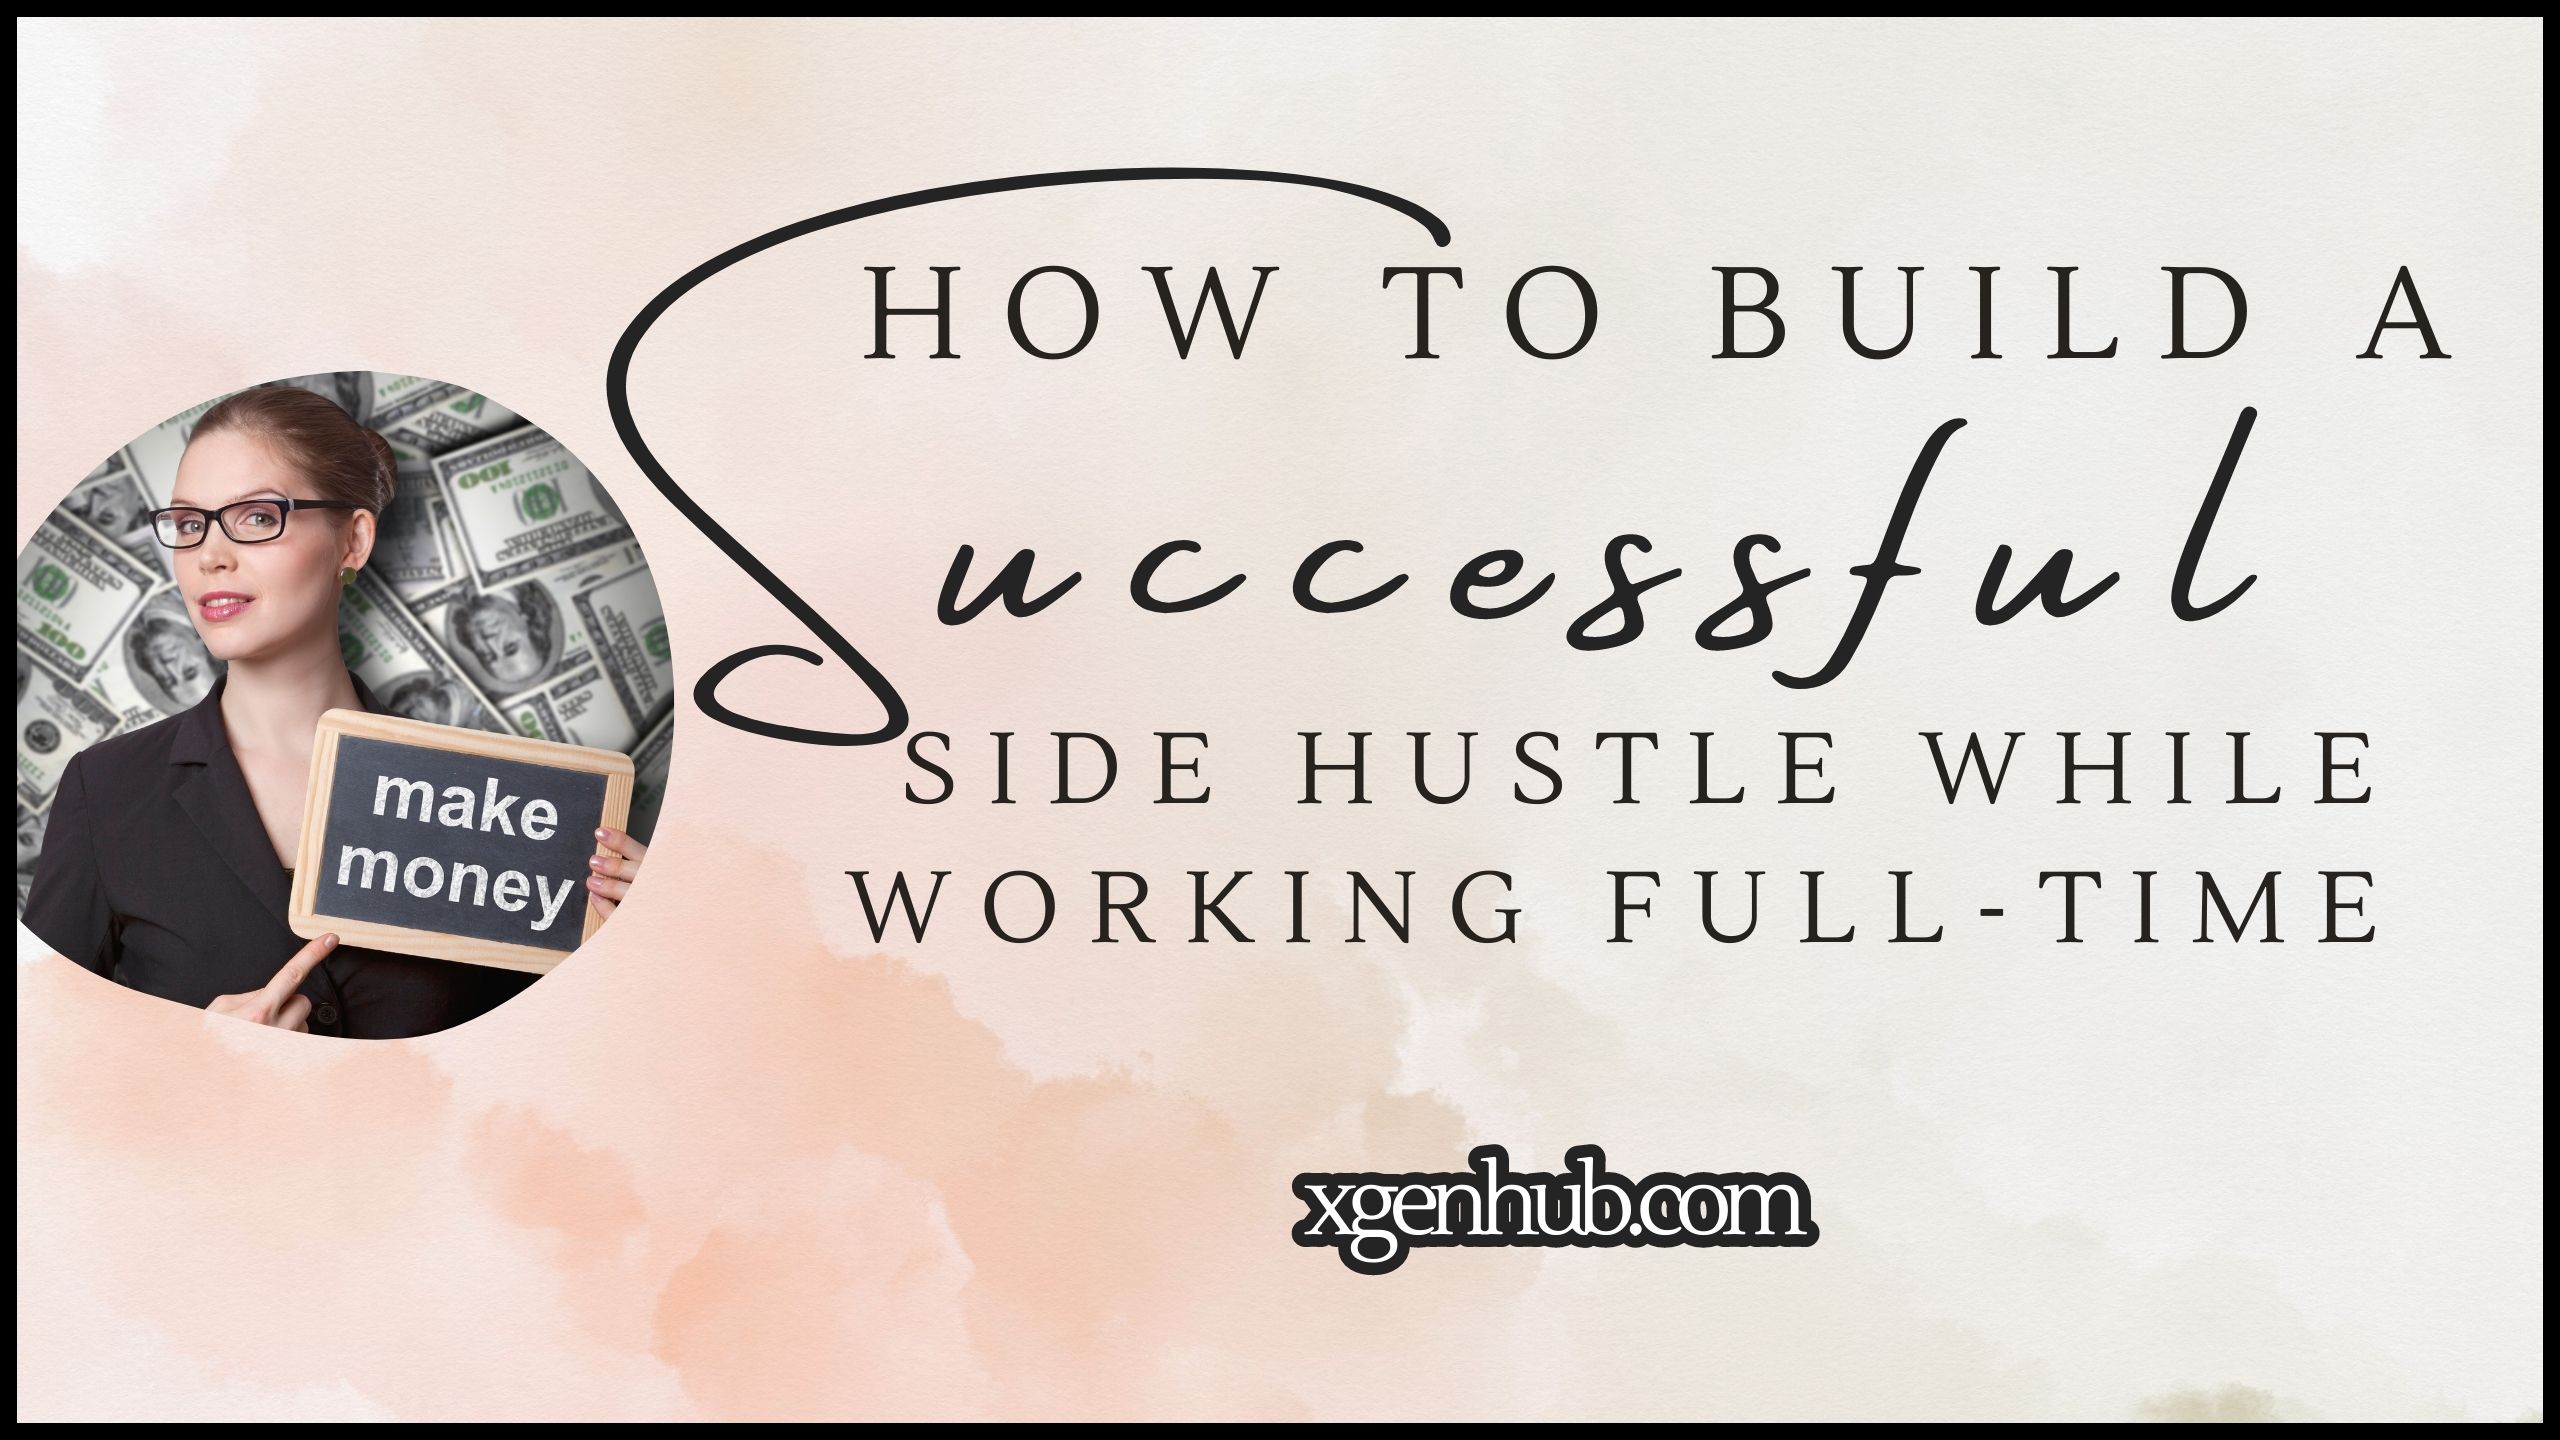 How to Build a Successful Side Hustle While Working Full-Time